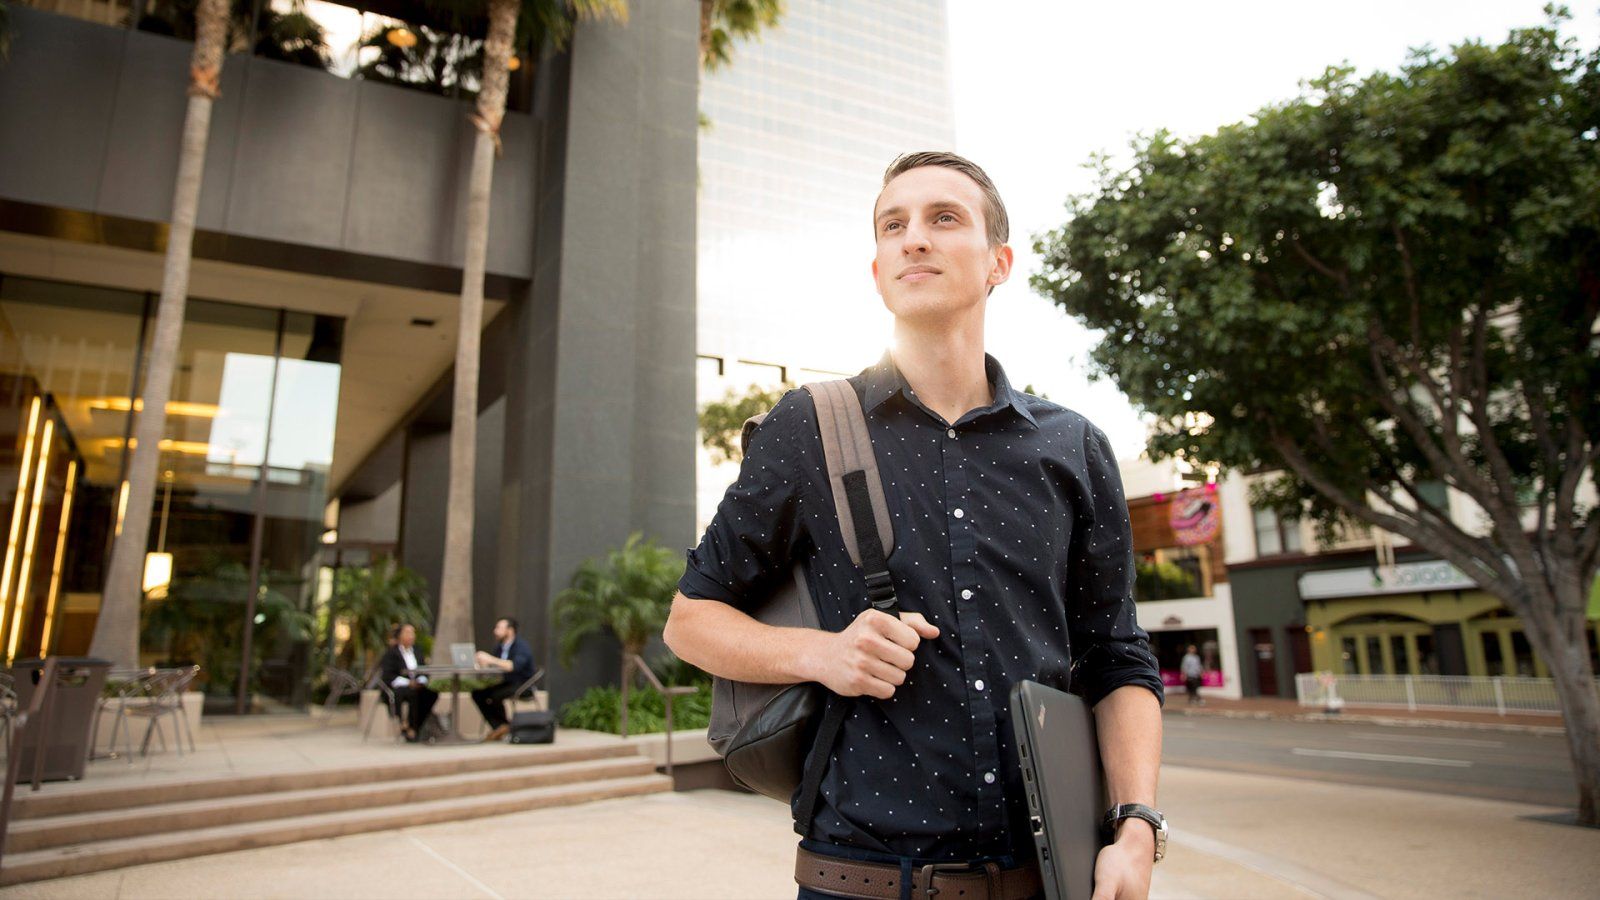 A well-dressed student looks across the street while in downtown San Diego.